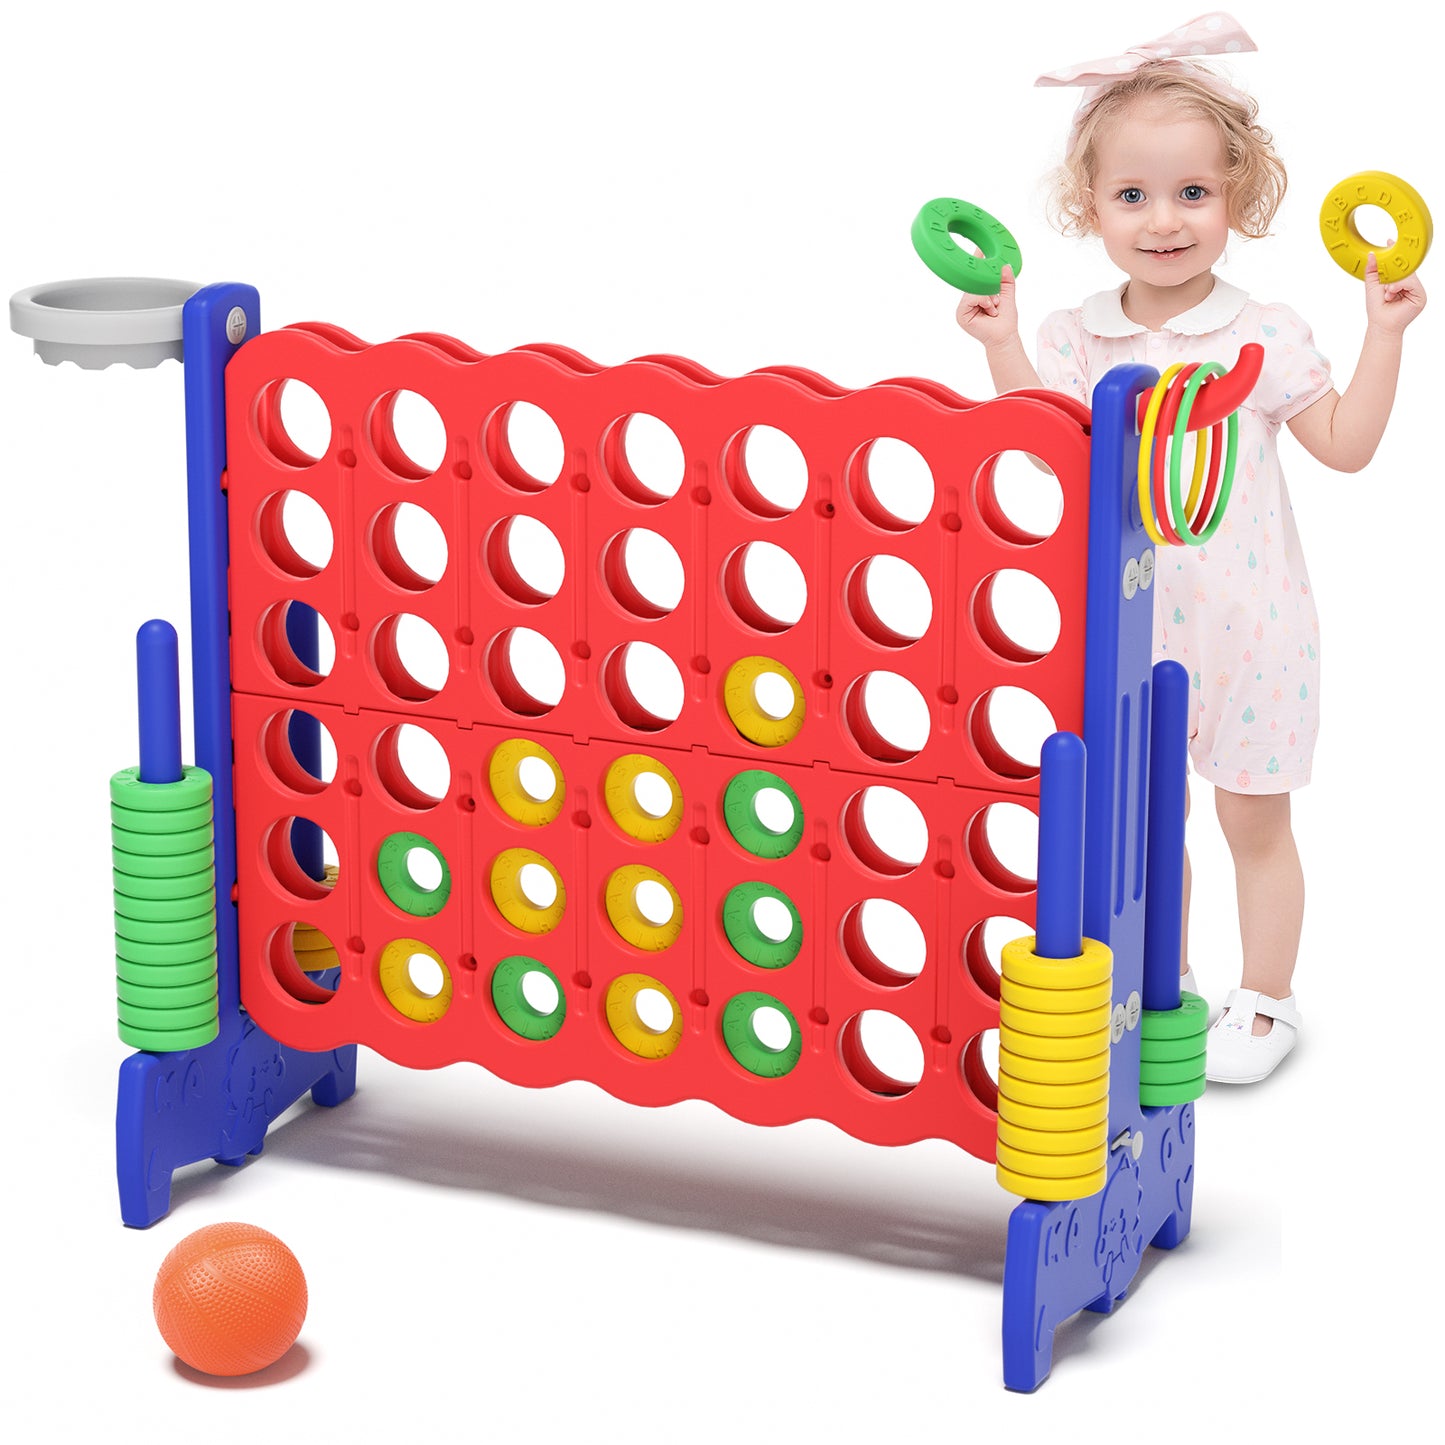 YUFU Jumbo 4-to-Score Giant Game Set 4-in-a-Row Connect Game for Adults Kids Family Fun, Blue Red